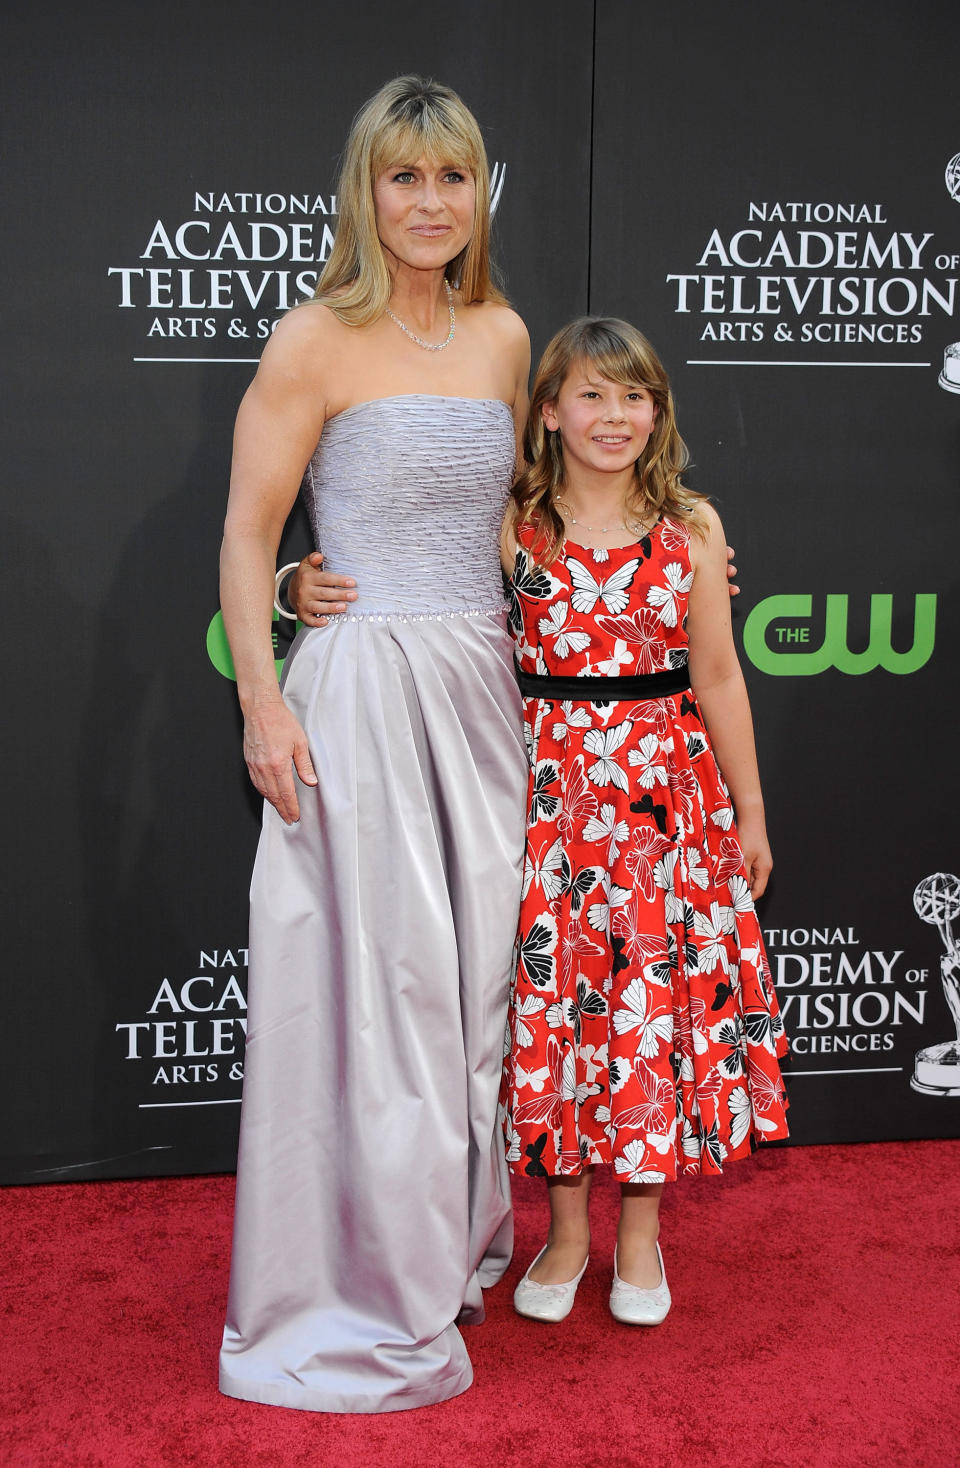 TV personality Bindi Irwin (R) and Terri Irwin attend the 36th Annual Daytime Emmy Awards at The Orpheum Theatre on August 30, 2009 in Los Angeles, California.  (Photo by Frazer Harrison/Getty Images)